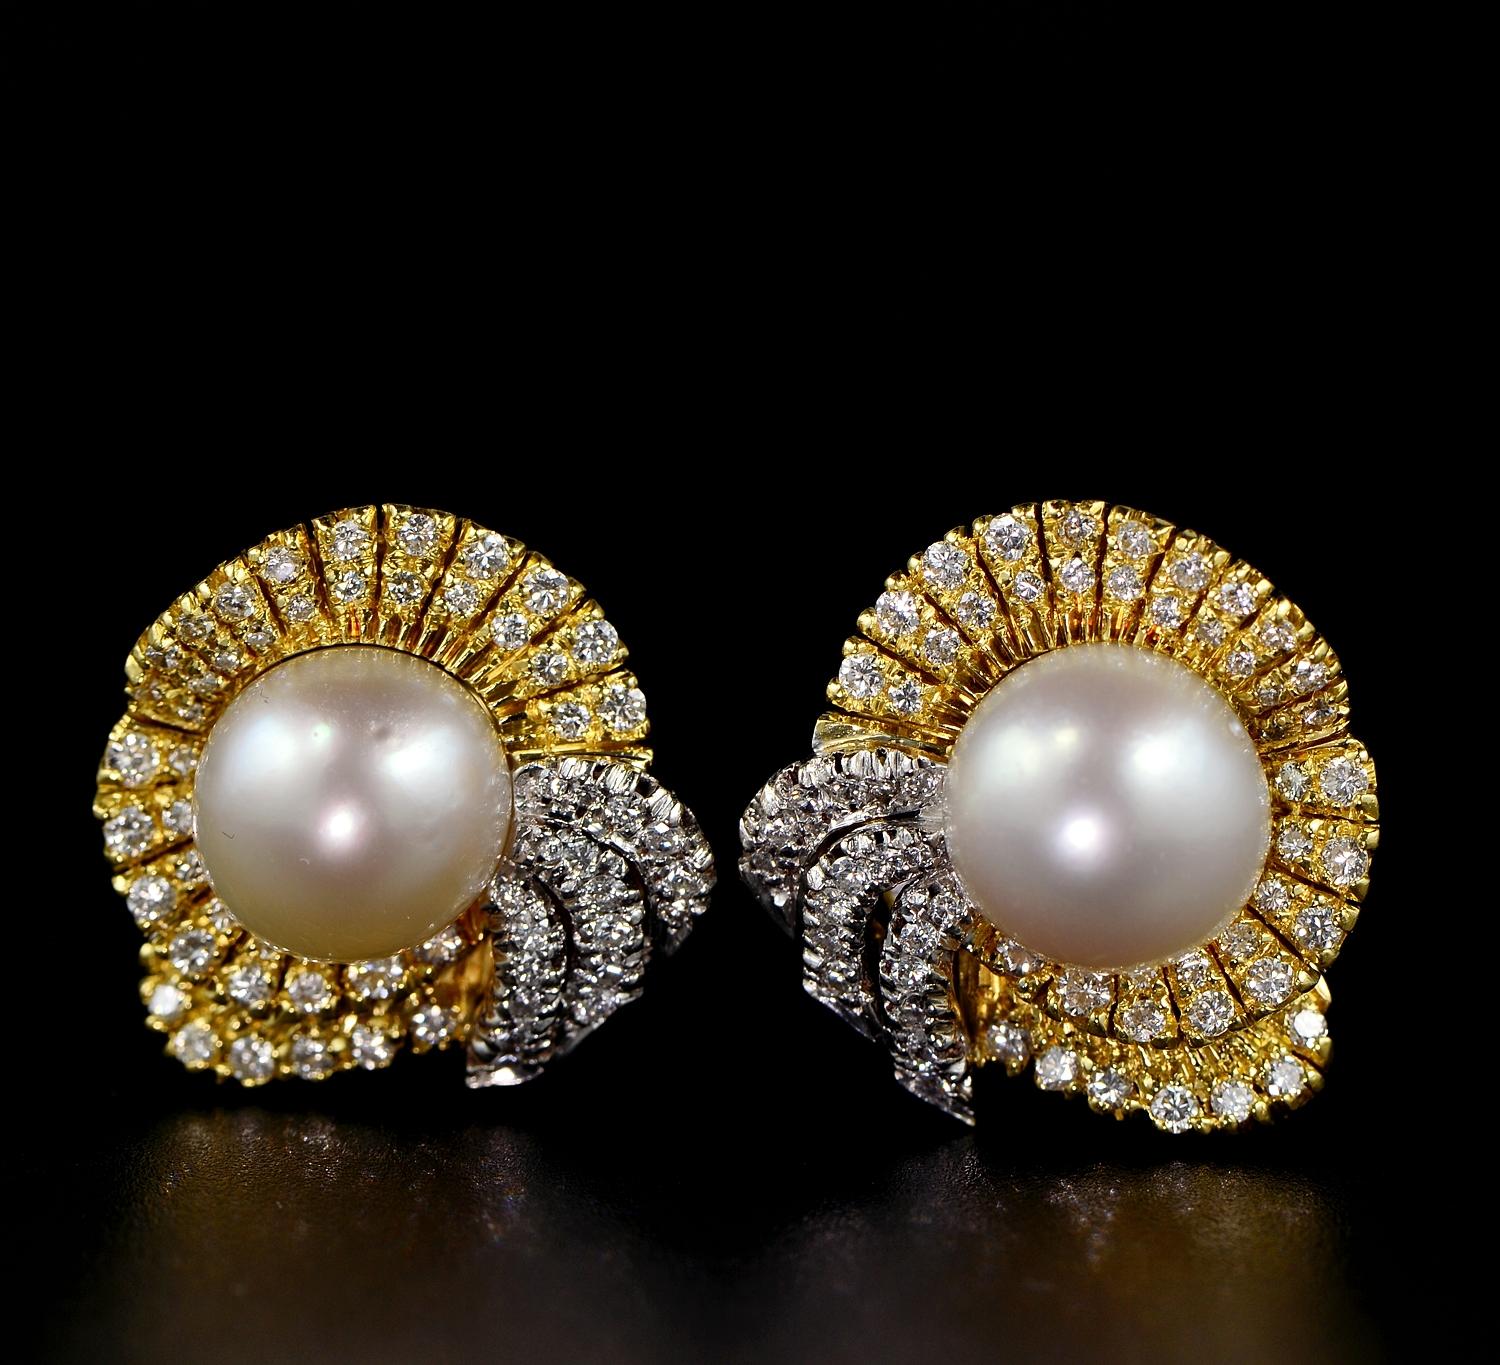 This charming pair of Pearl and Diamond earrings are 1945 ca
Skilfully hand crafted of solid 18 Kt gold by past jewellery masters in unique Diamond Bow design expressing the fashion trend of that period as favorite
Centrally set with two well